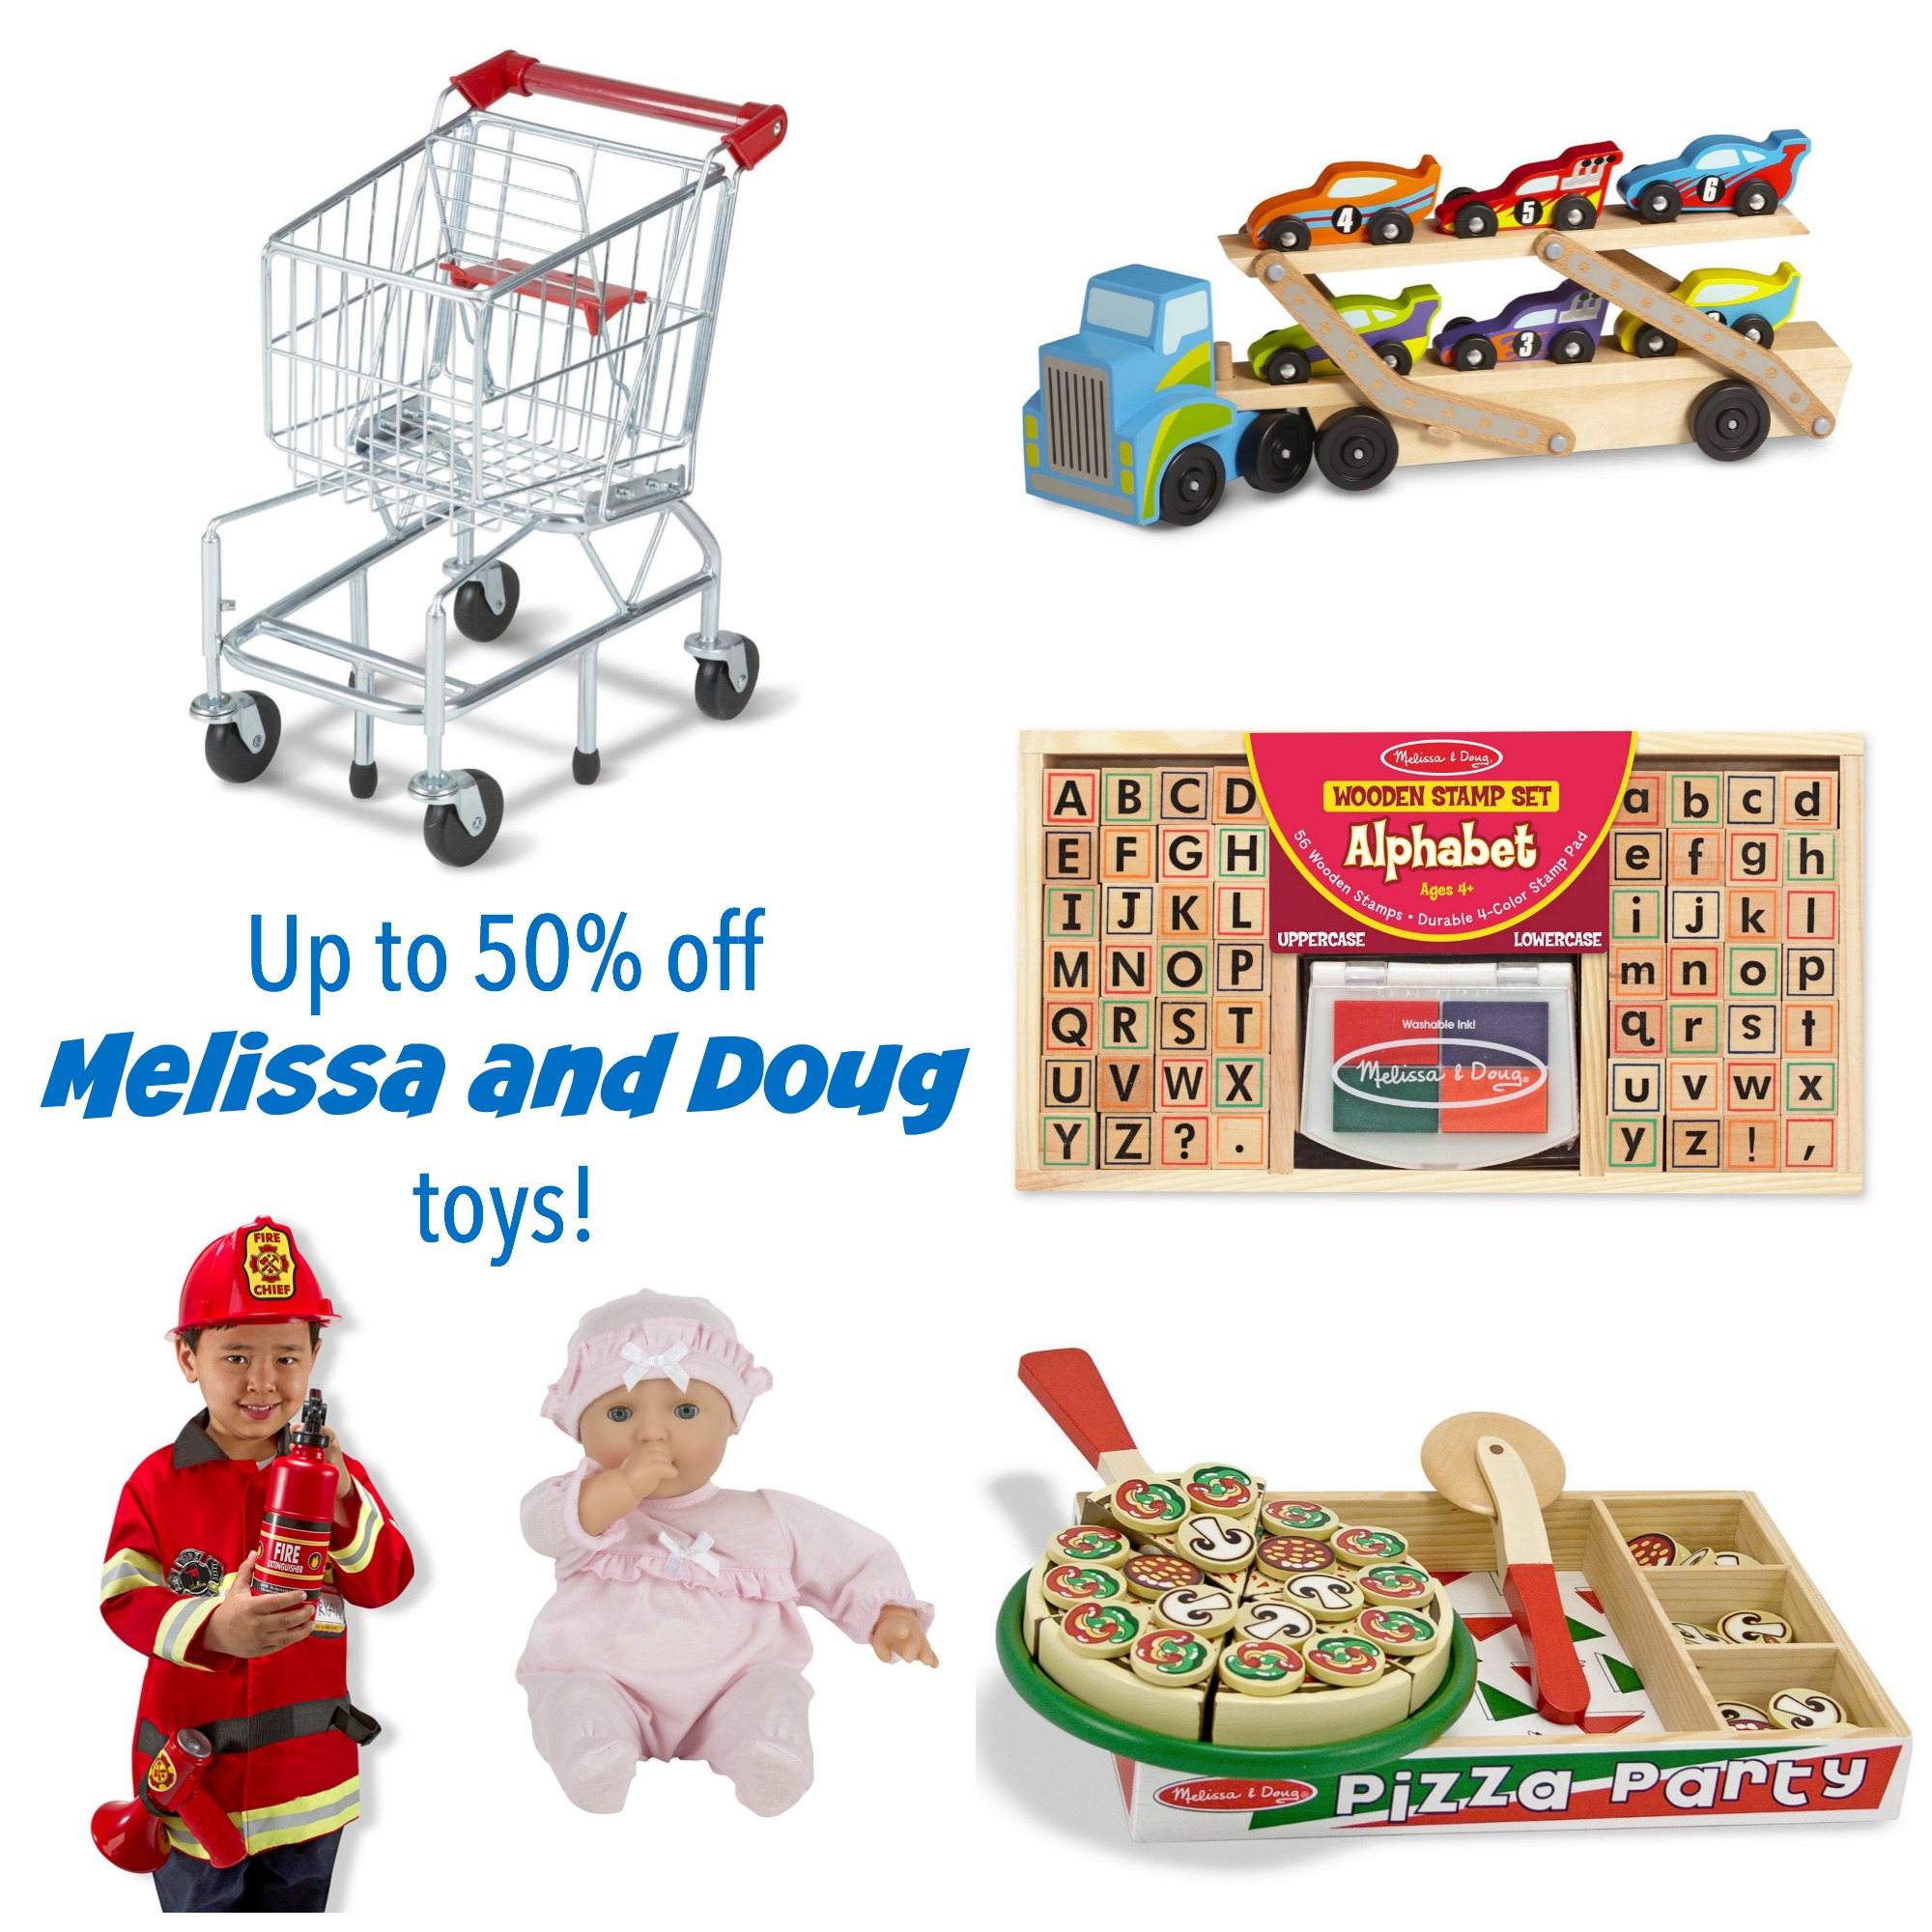 Up to 50% Off Melissa and Doug Toys!